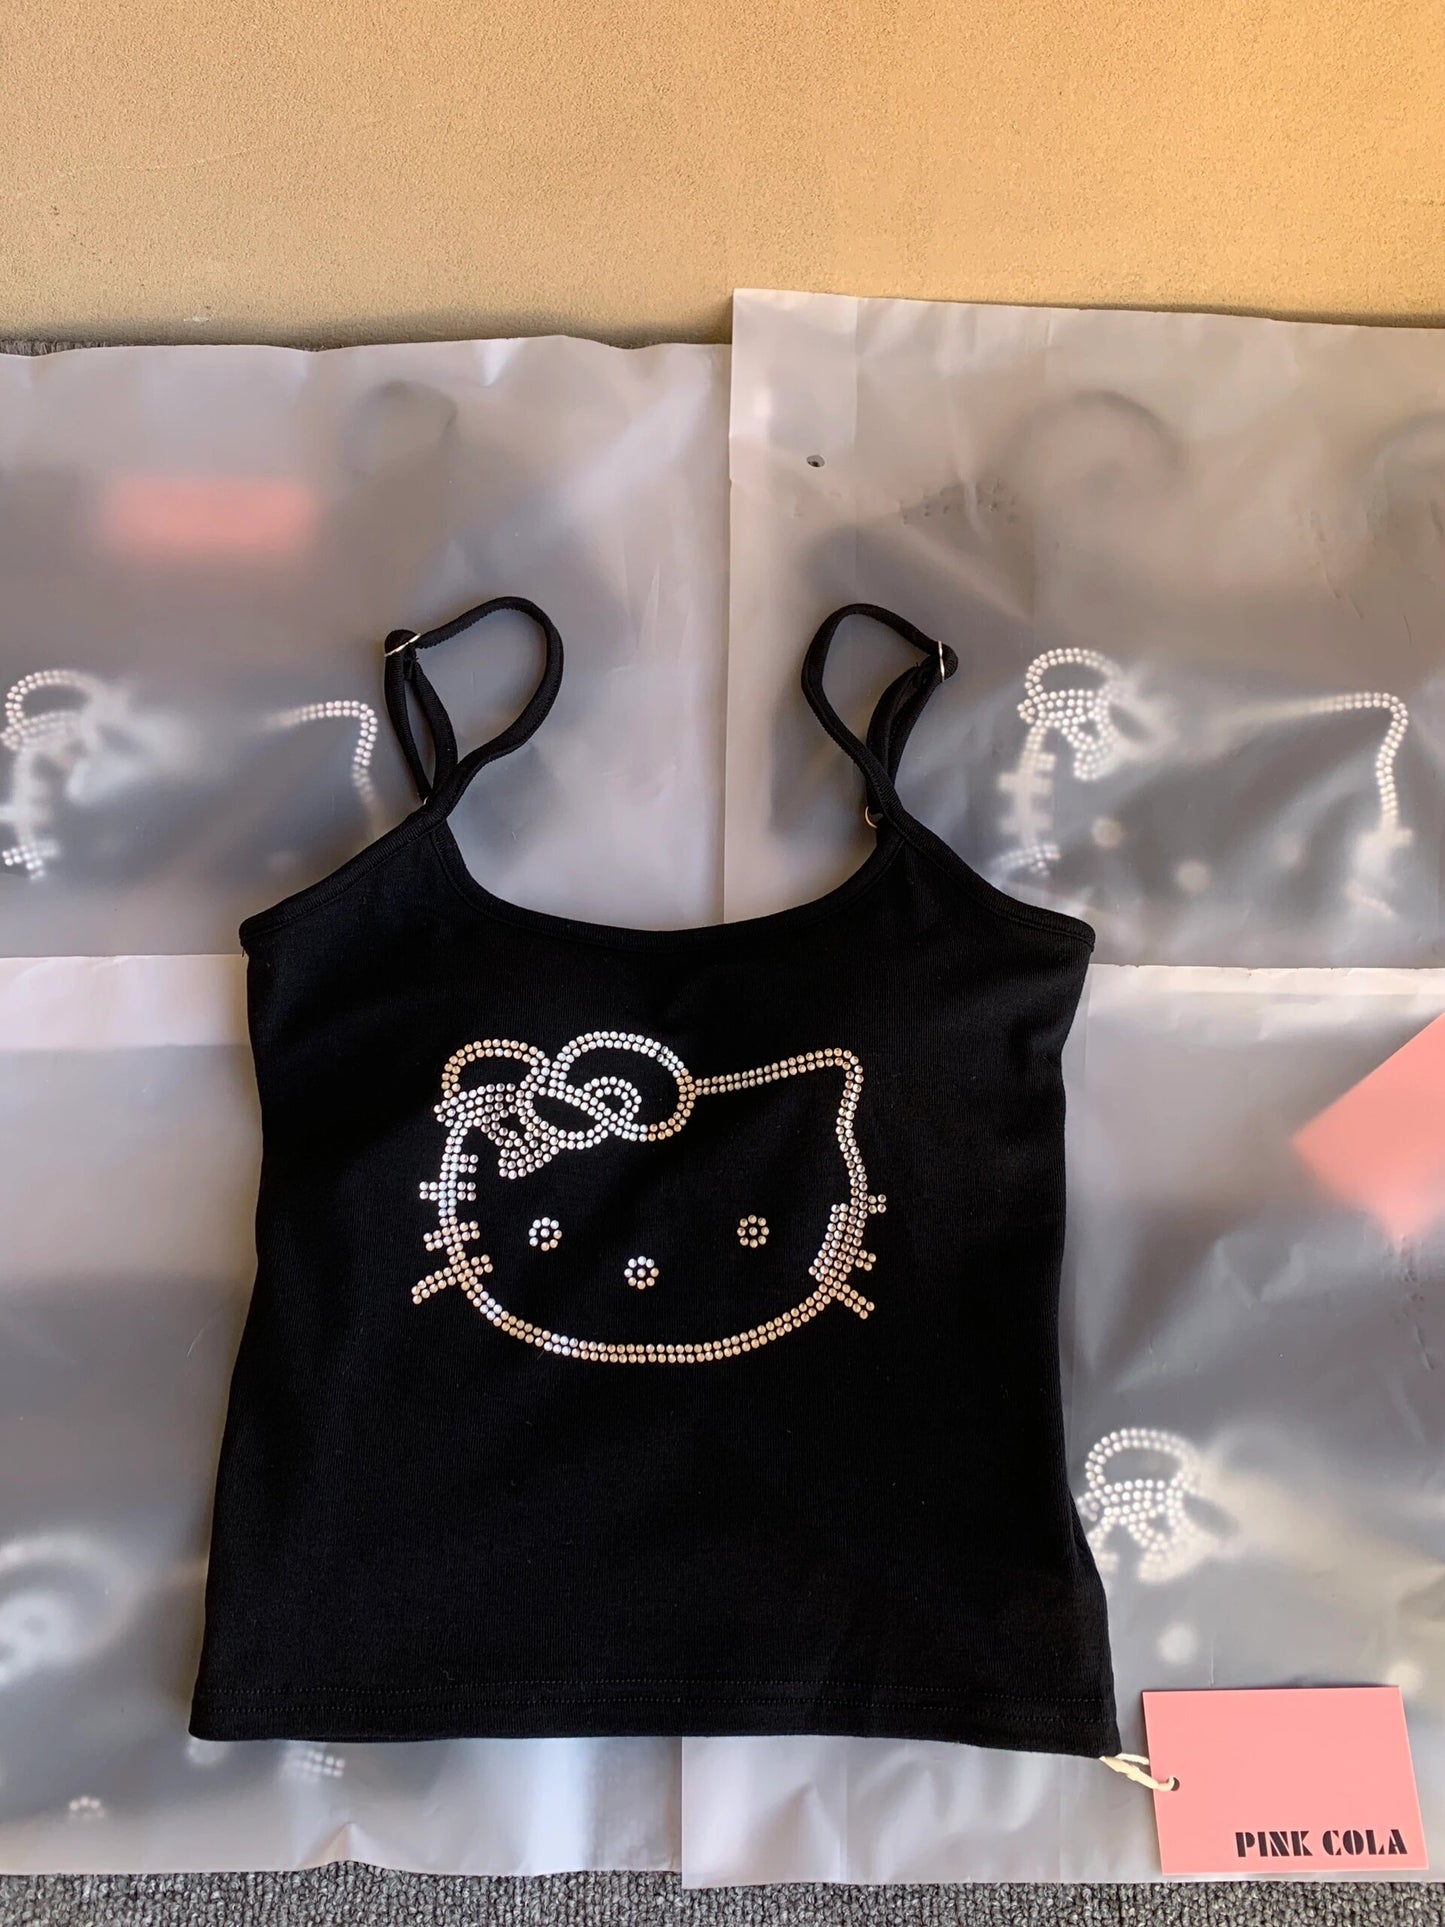 Hellokitty Rhinestone Camisoles Tops with Built in Padded Bra Basic Breathable Tank Top